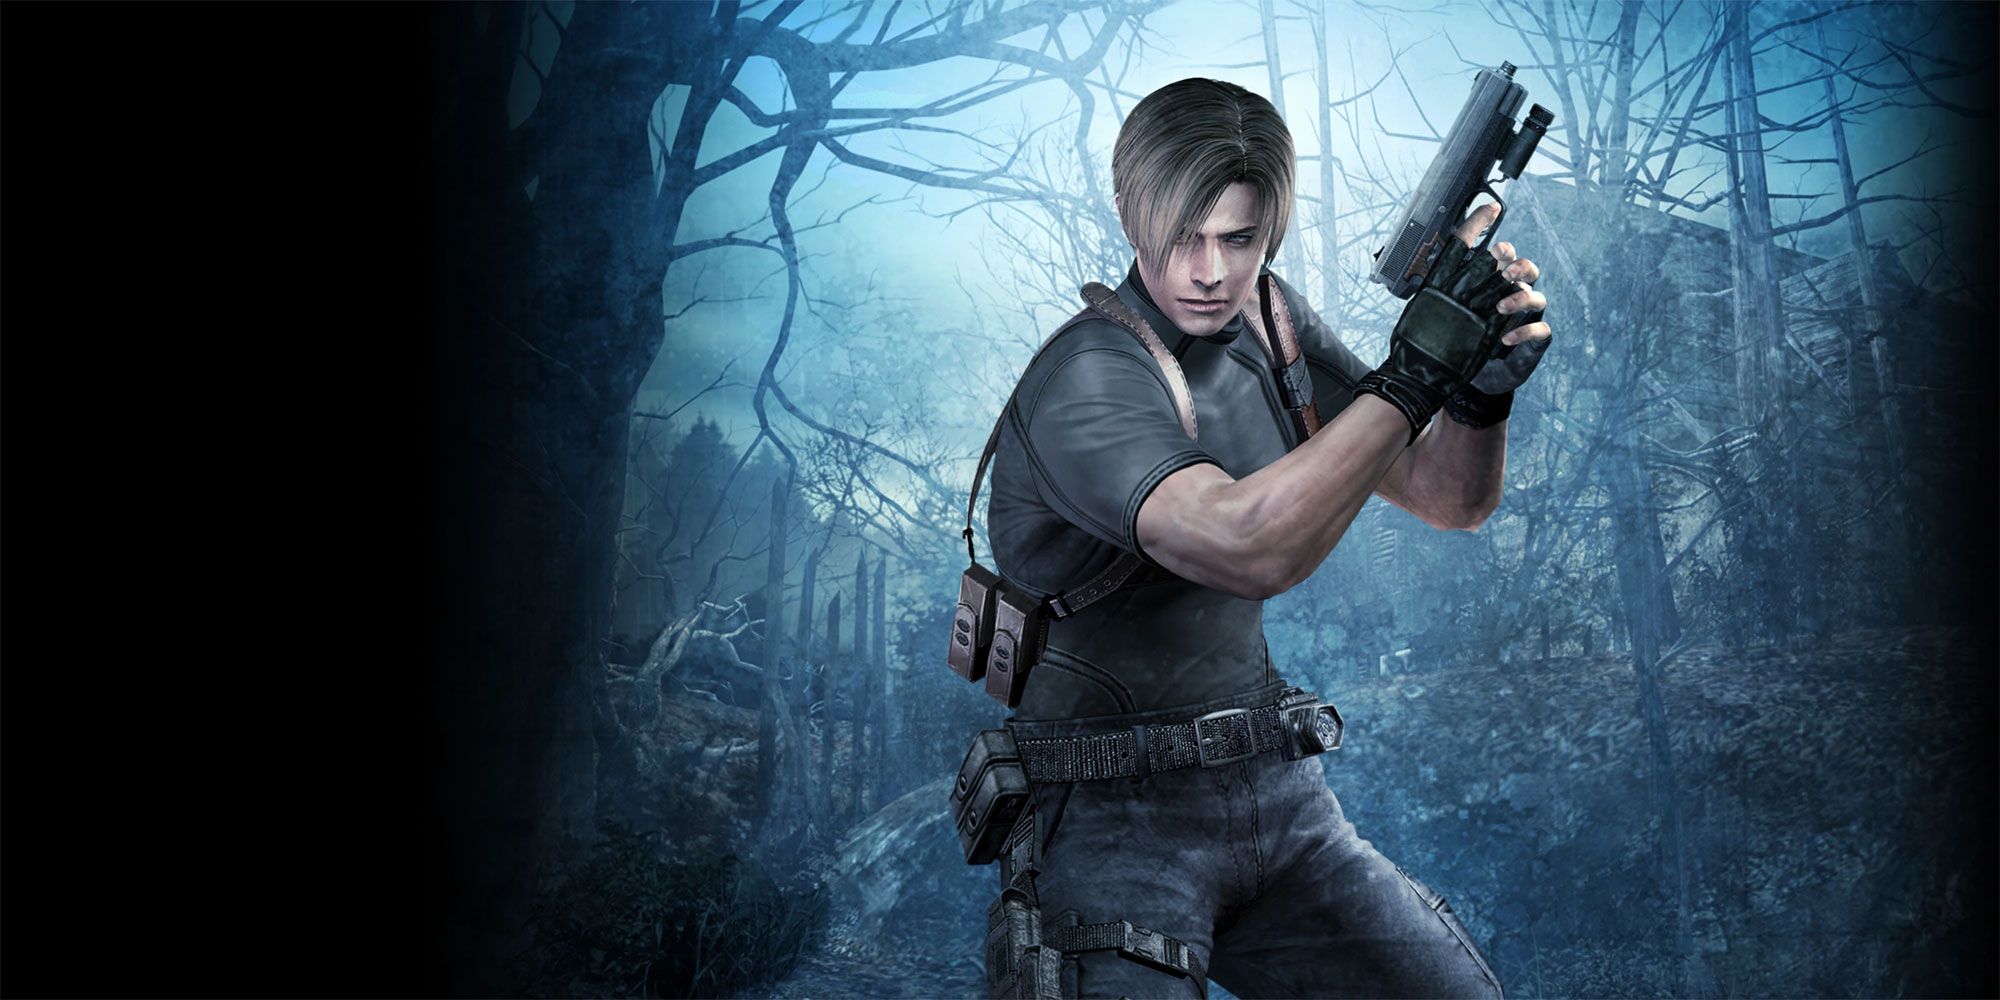 Leon S. Kennedy holds a gun up in front of a European Village in Resident Evil 4.